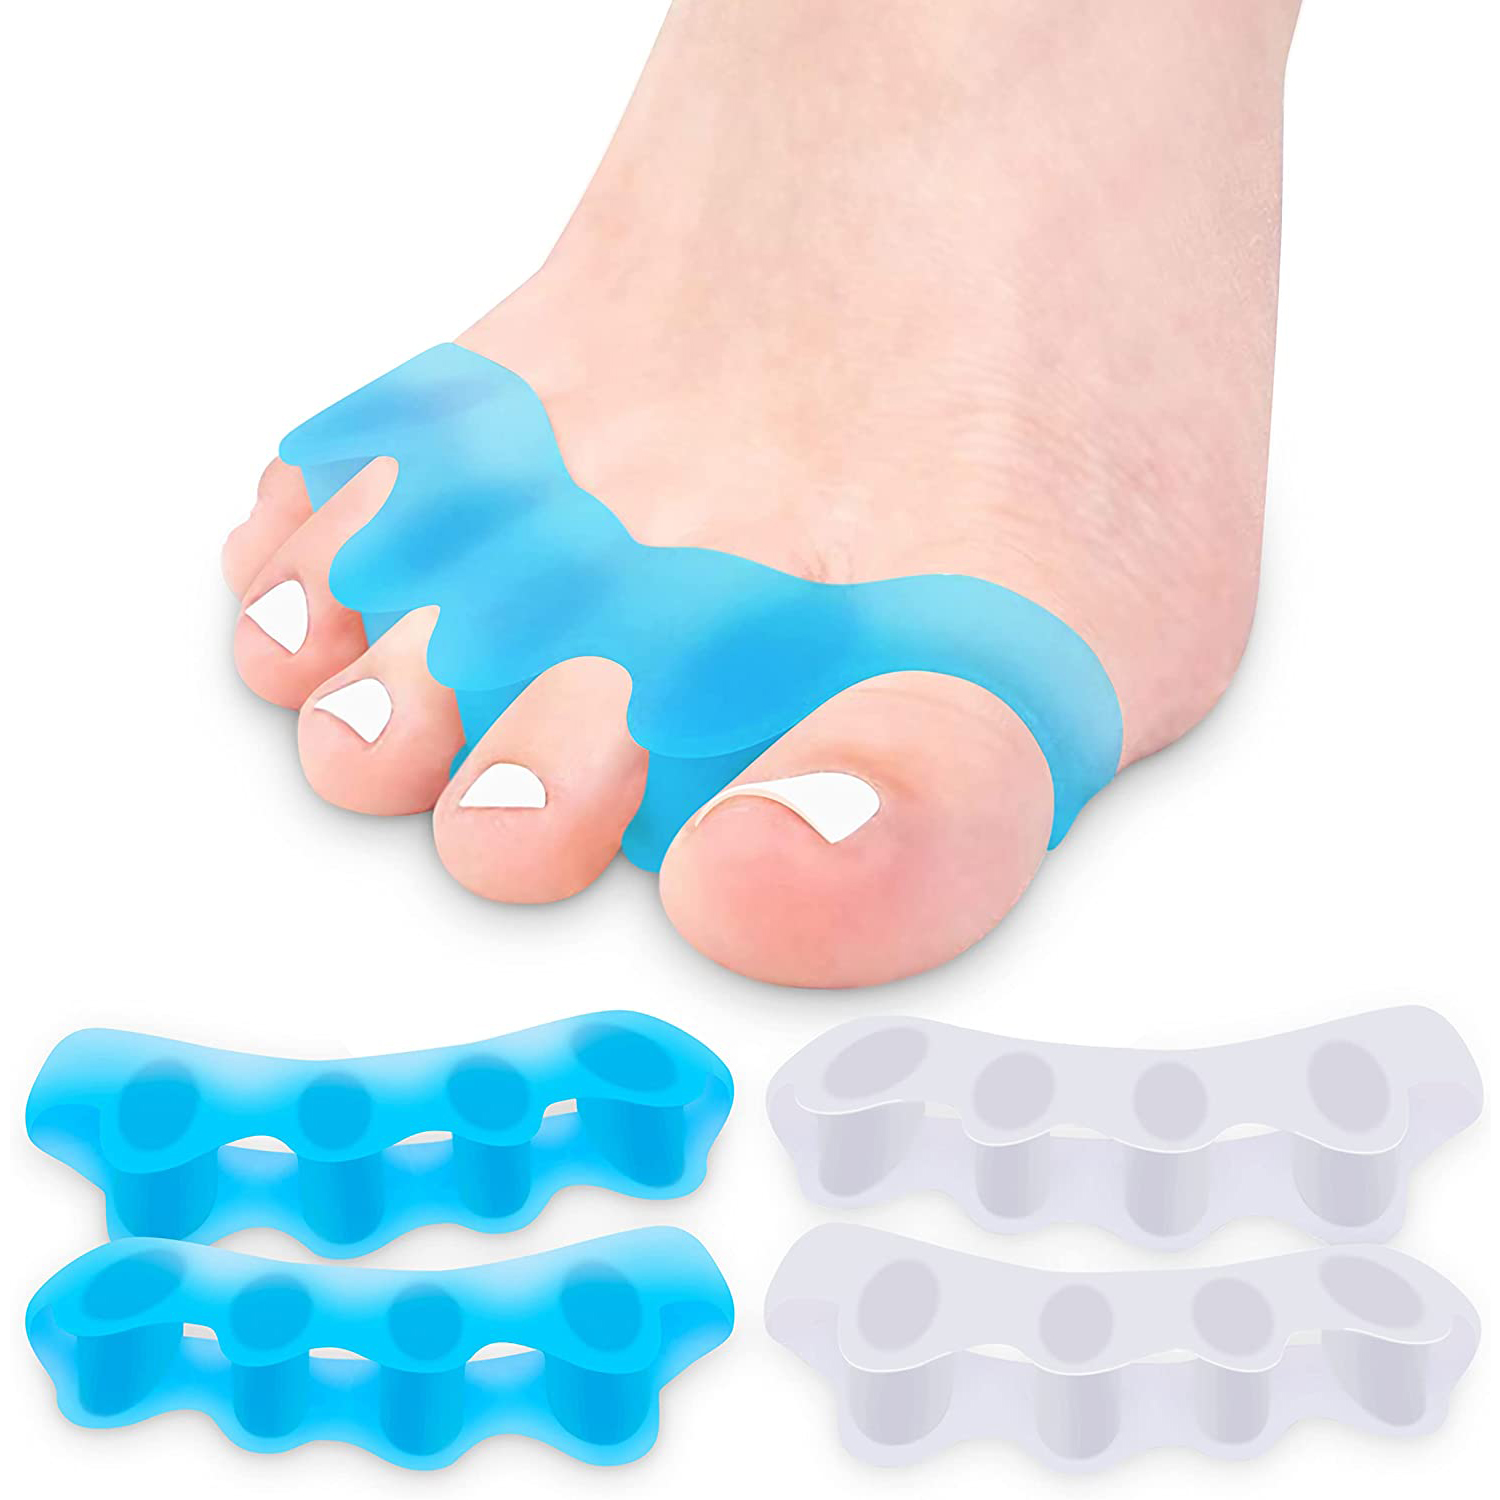 1 Pack Toe Separators To Correct Bunions And Restore Toes To Their Original Shape Bunion Corrector For Women Men Toe Spacers Toe Straightener Toe Stretcher Big Toe Correctors Toe Separator